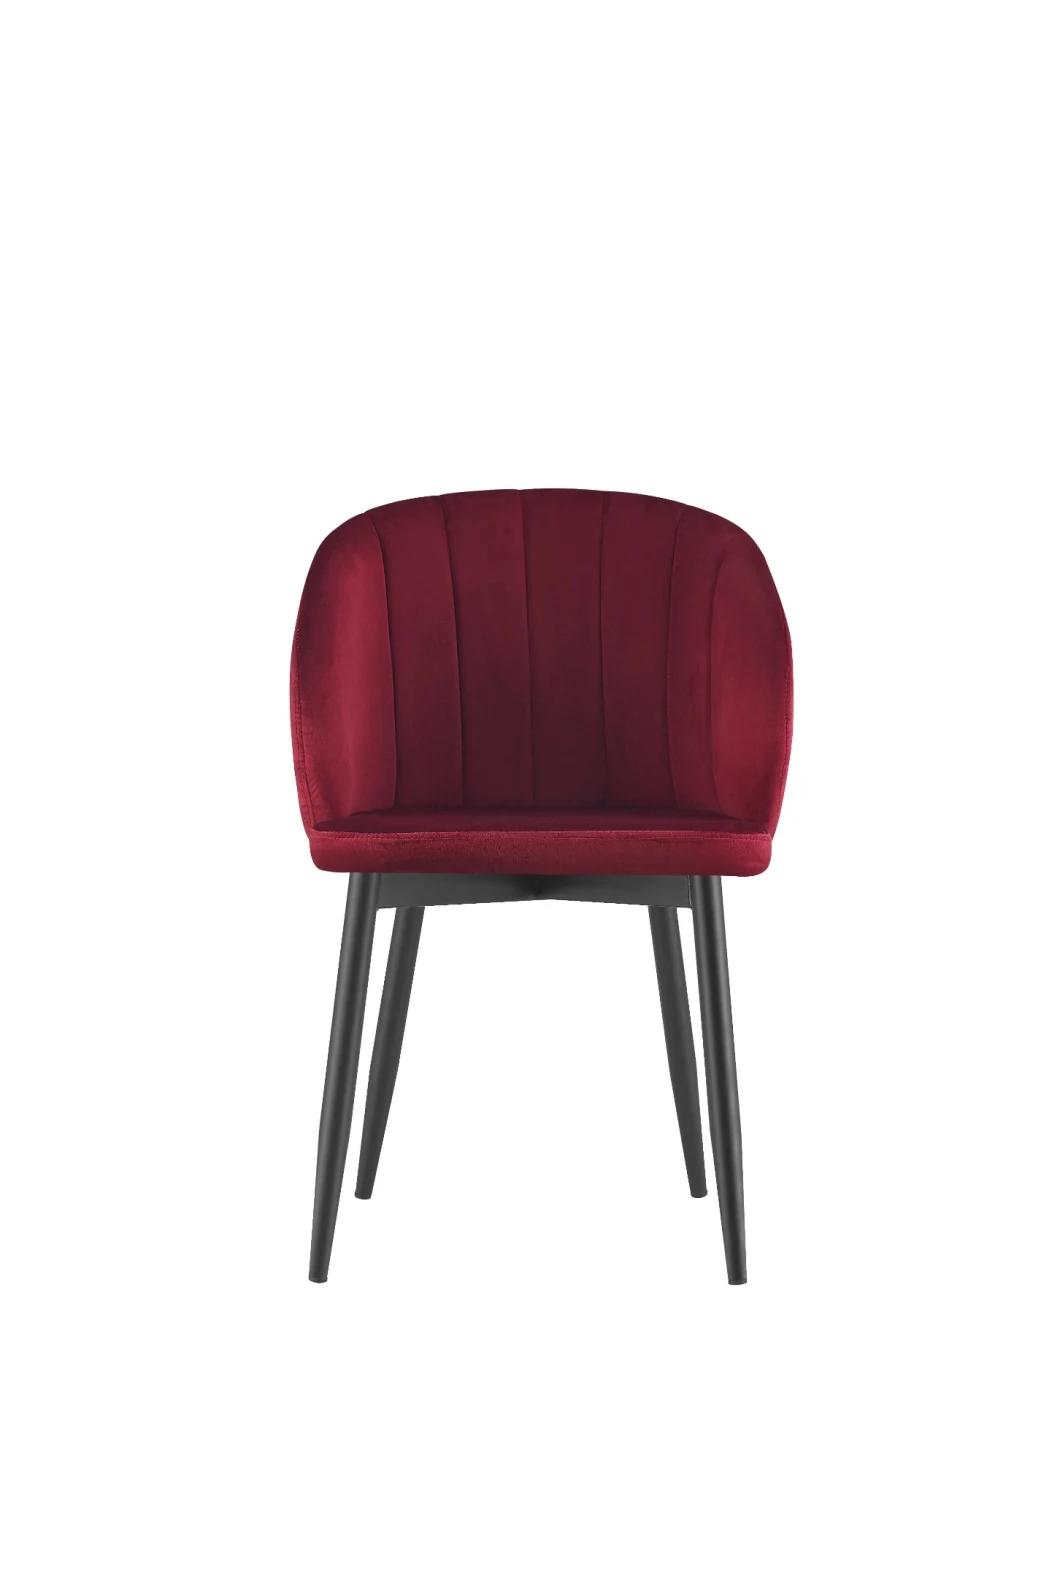 Luxurious Poland Popular Design Velvet and Metal Legs Dining Chair at Low Price for Home Using